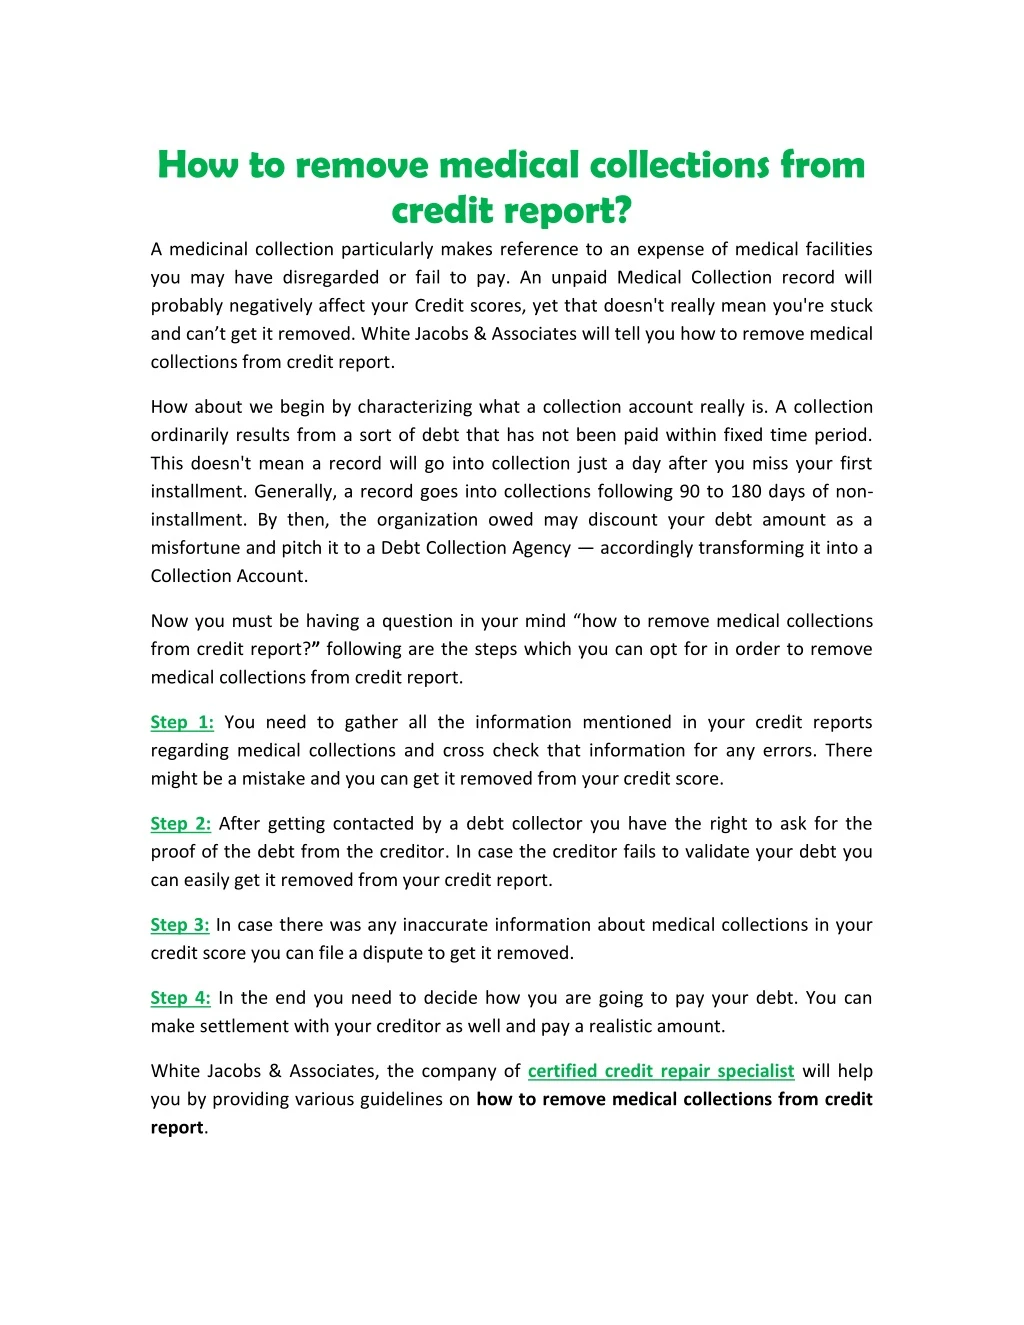 how to remove medical collections from credit